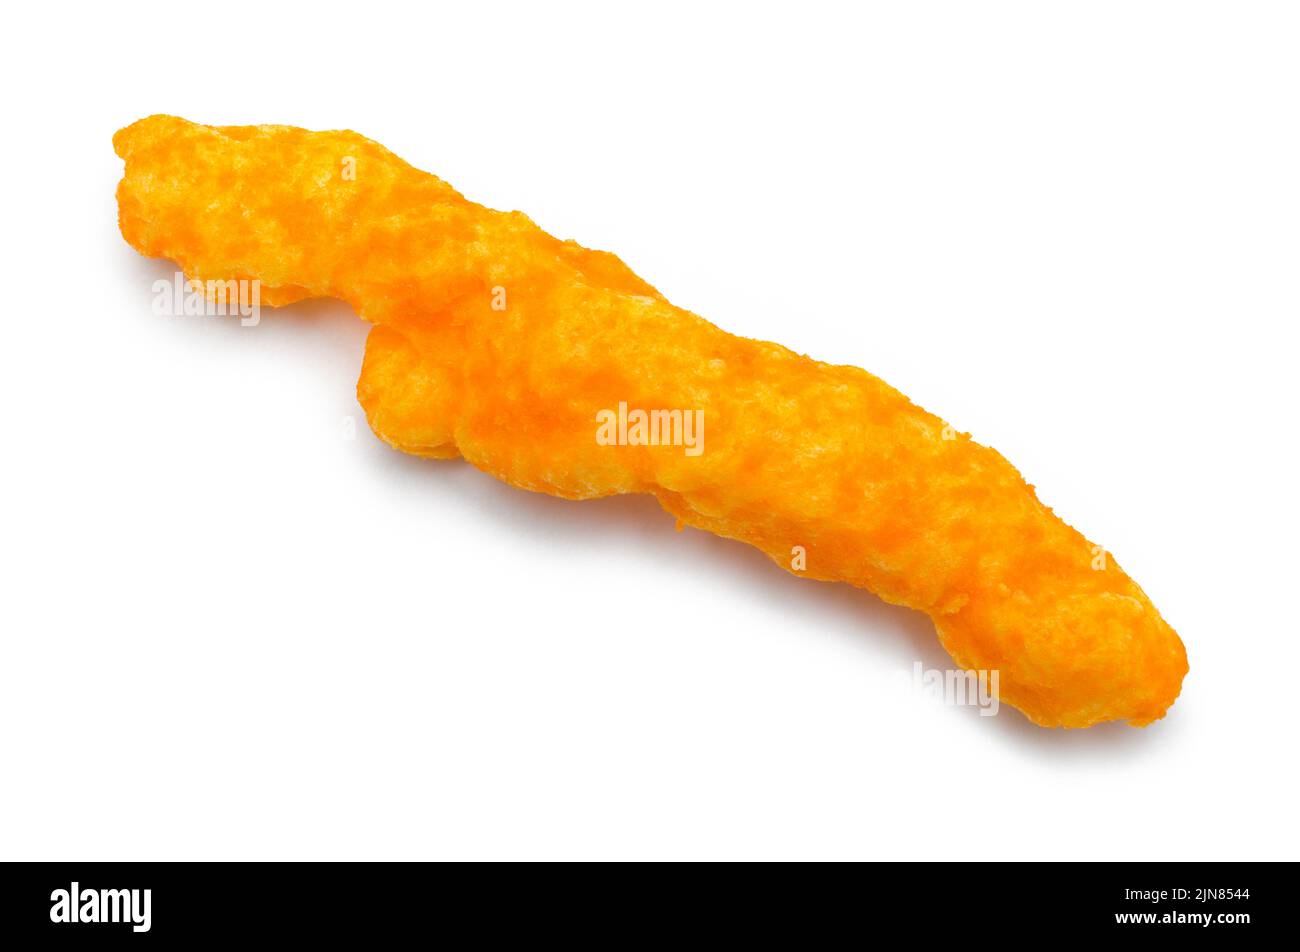 Single Crunchy Cheese Puff Snack Cut Out. Stock Photo